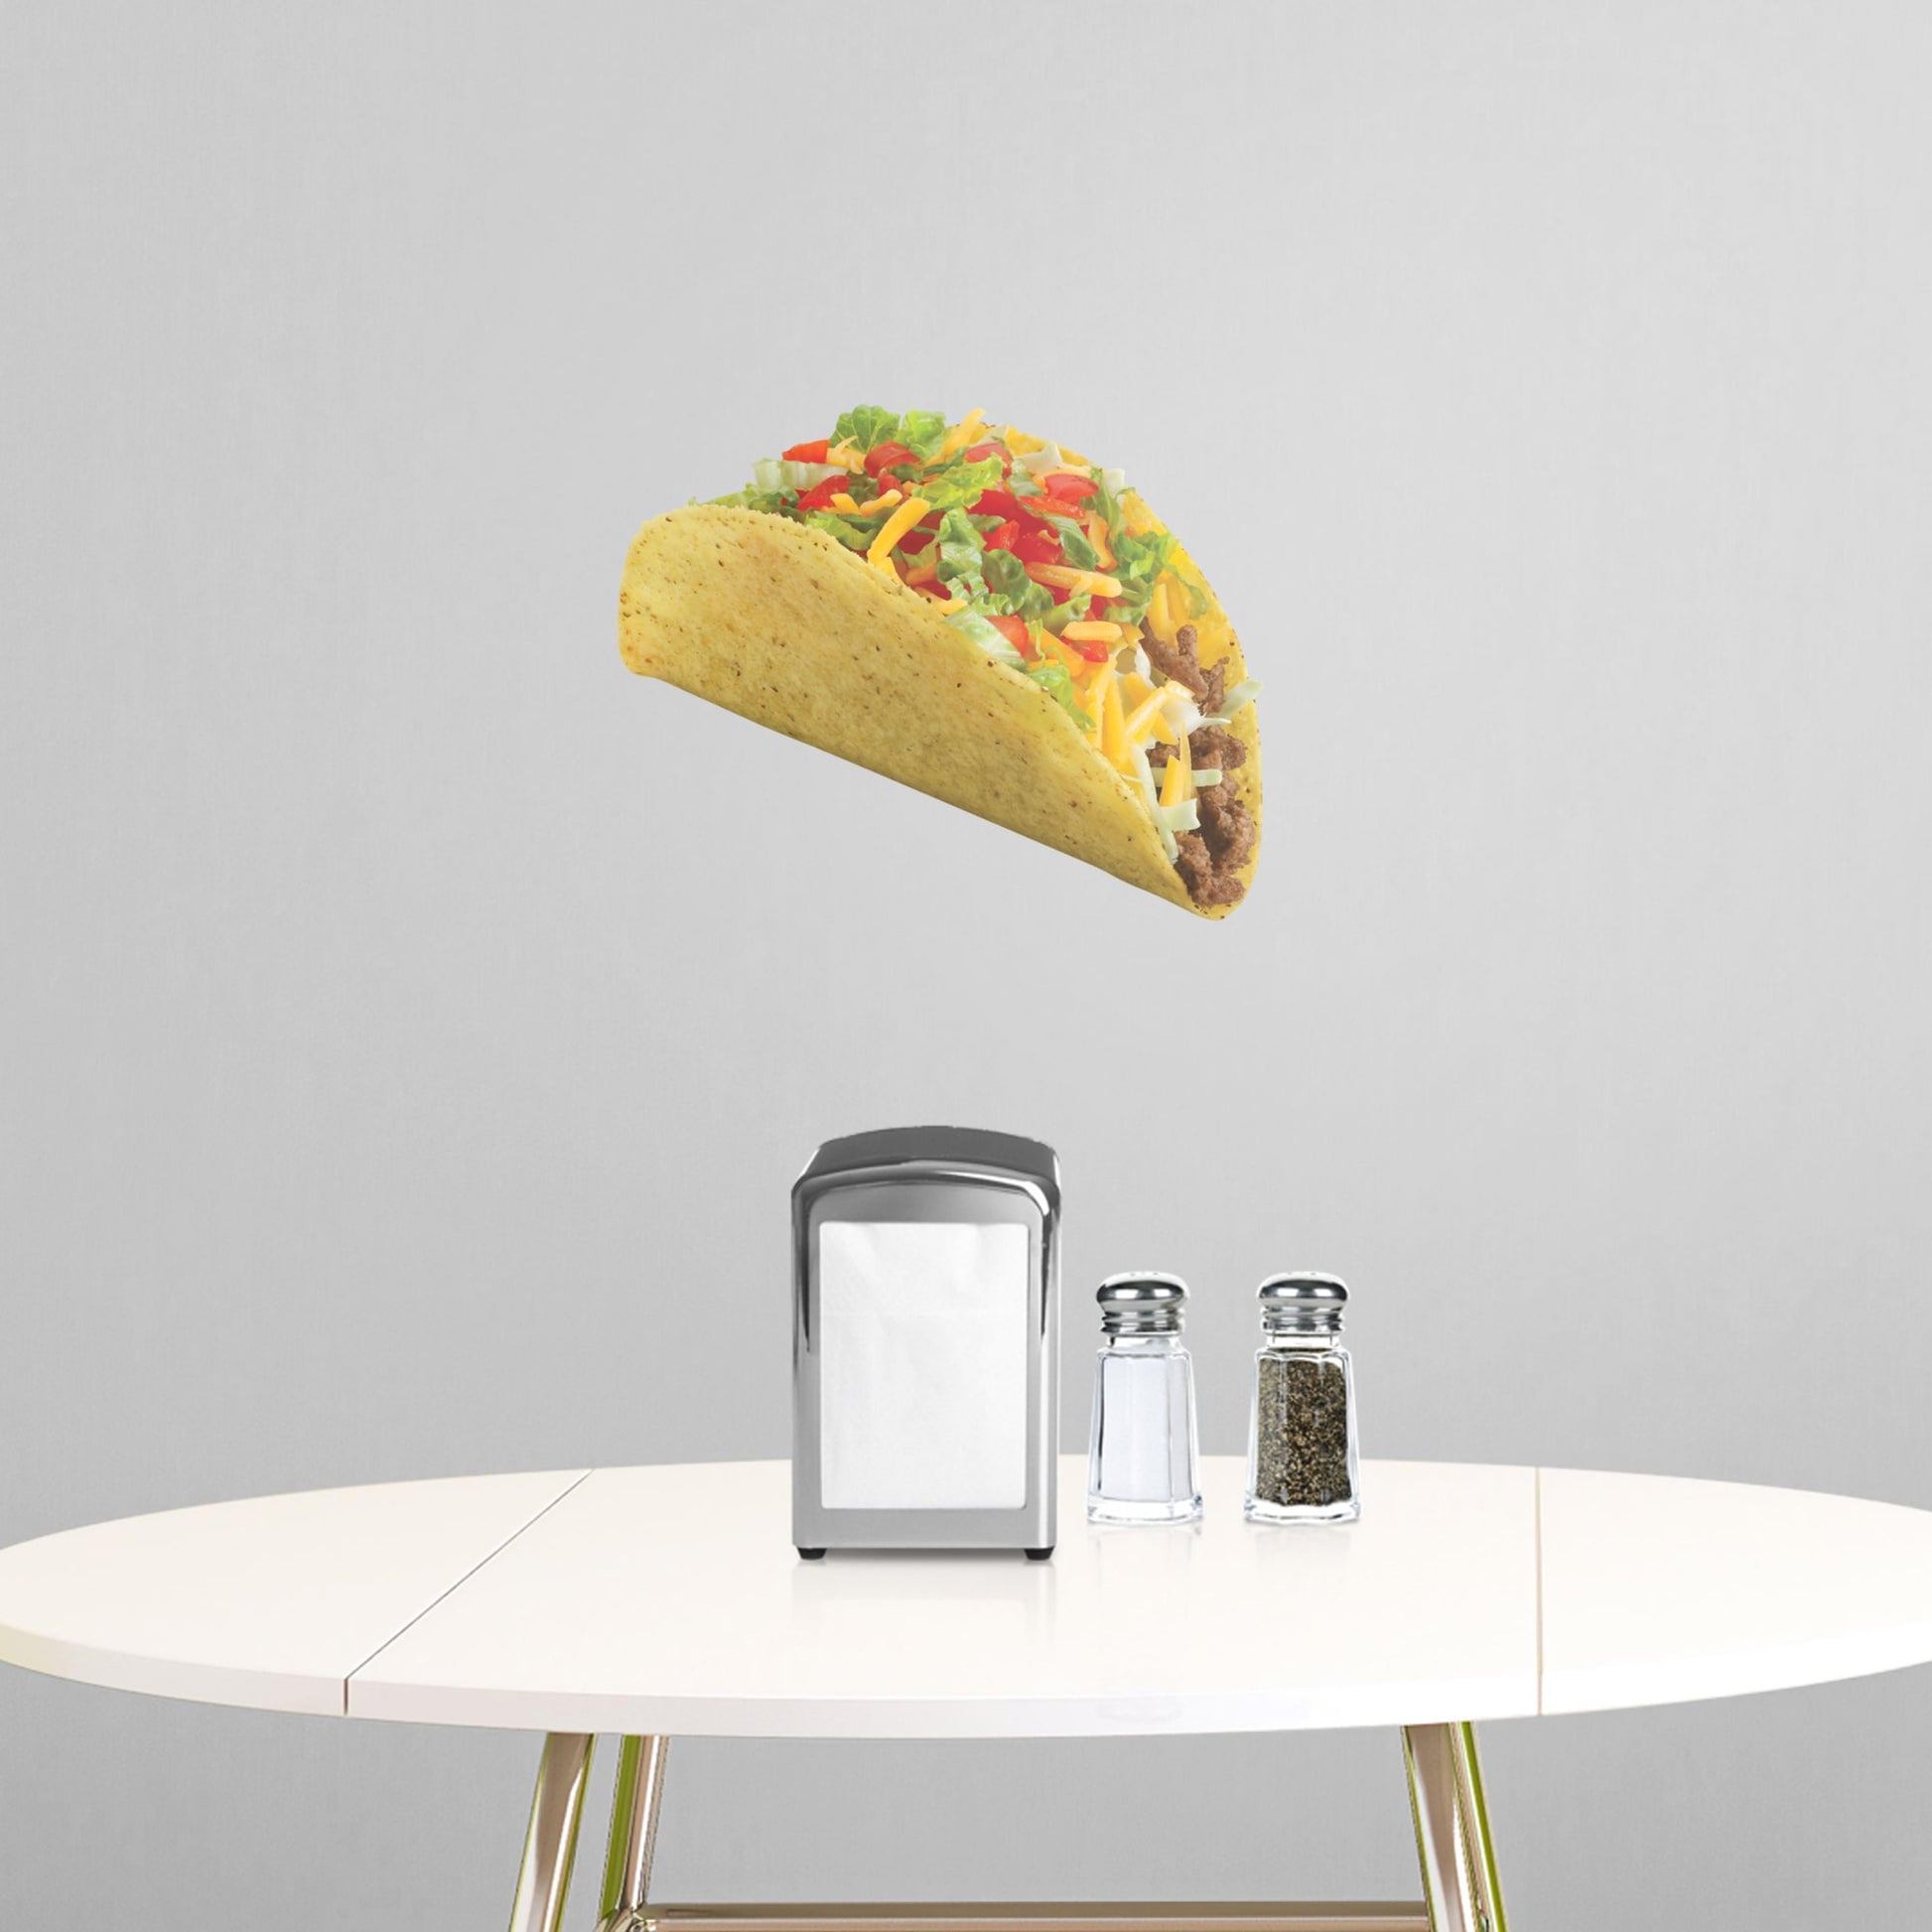 Large Taco + 2 Decals (14"W x 11"H)